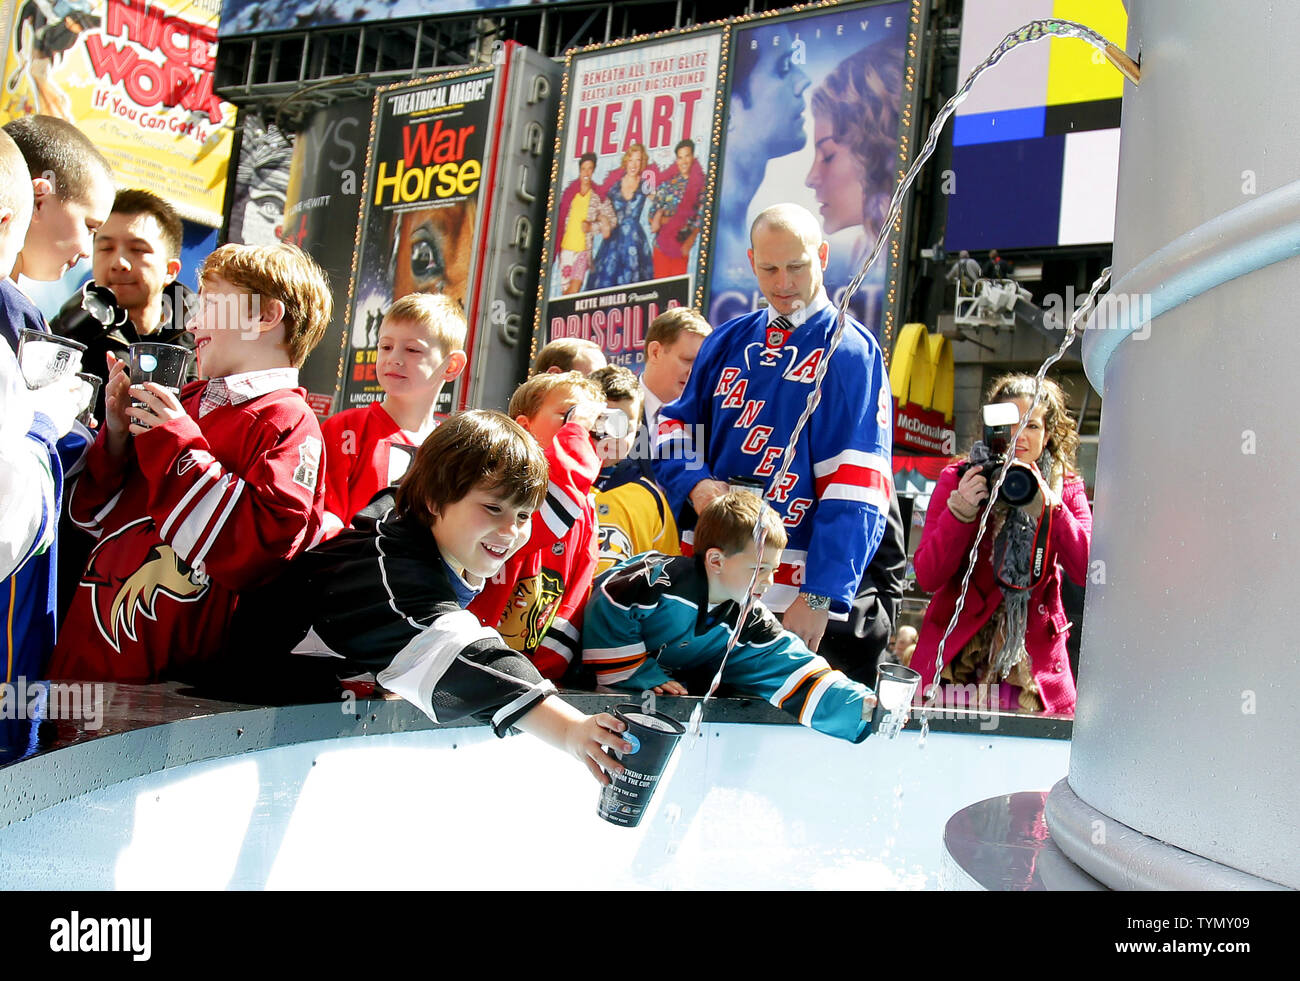 https://c8.alamy.com/comp/TYMY09/former-new-york-rangers-player-adam-graves-watches-kids-drink-from-a-21-foot-6600-pound-replica-of-the-stanley-cup-in-times-square-in-new-york-city-on-april-11-2012-the-stanley-cup-replica-also-serves-as-a-working-fountain-so-nhl-fans-can-drink-from-the-famous-trophy-upijohn-angelillo-TYMY09.jpg